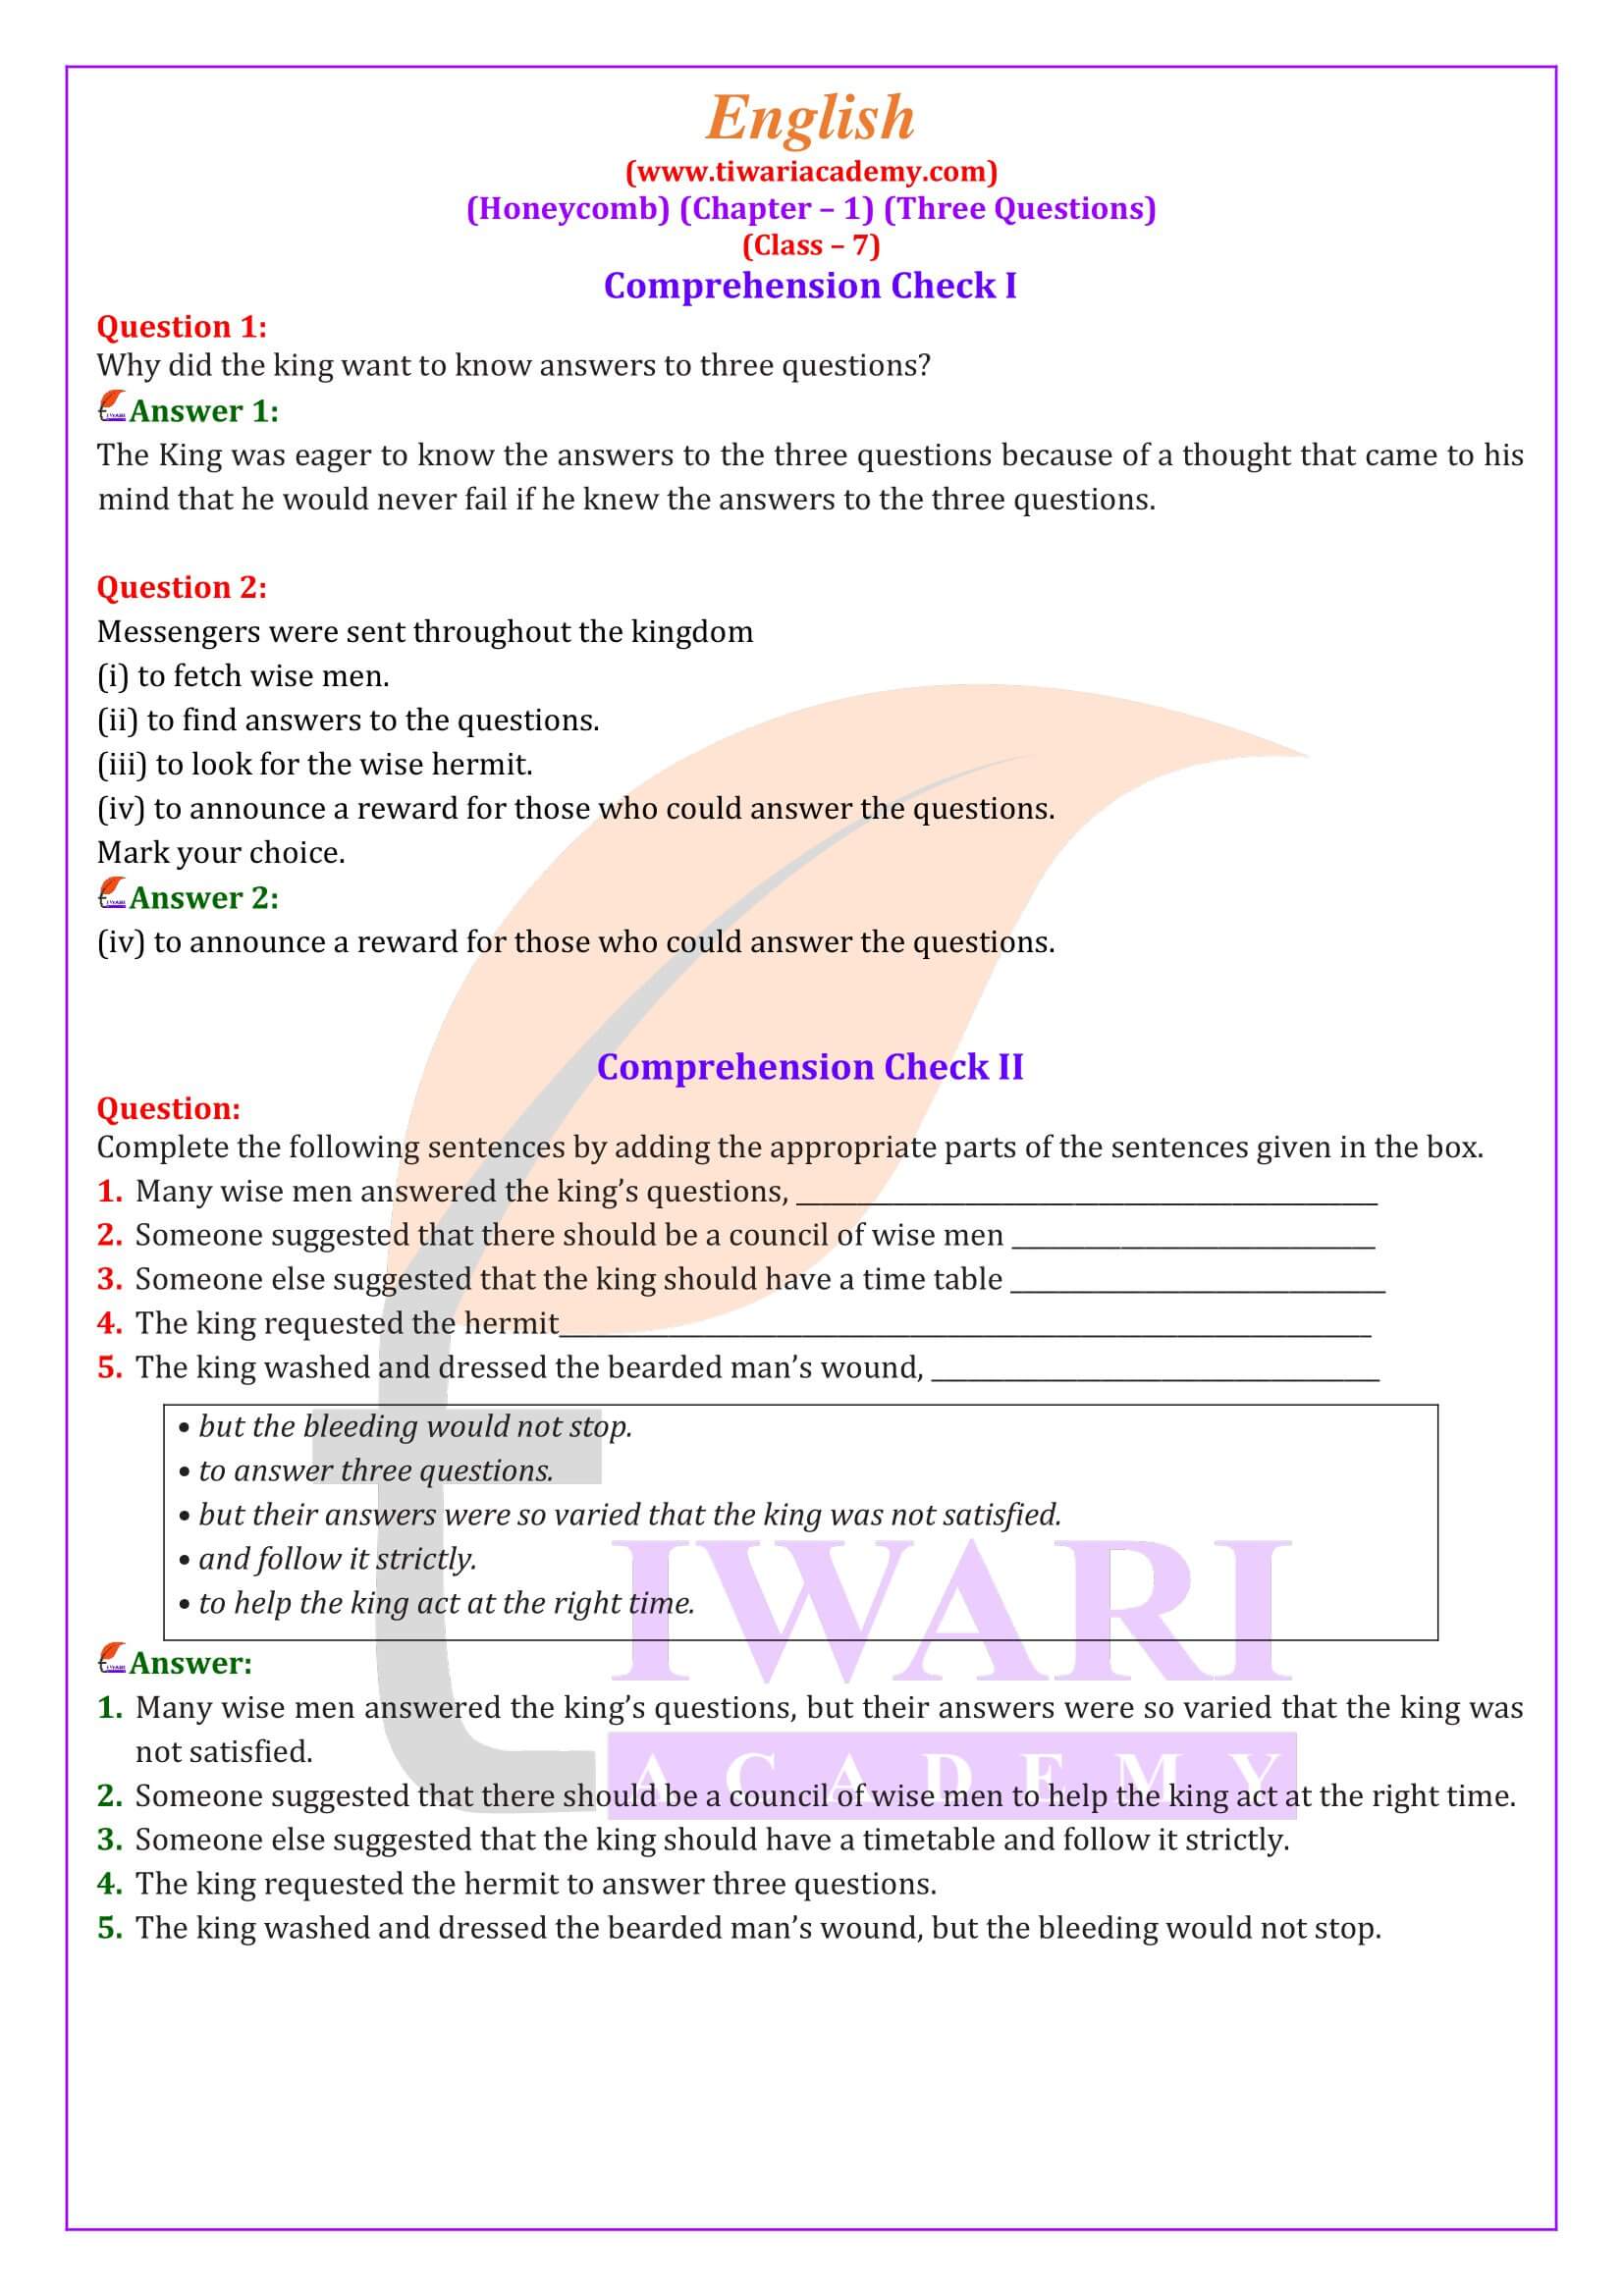 NCERT Solutions for Class 7 English Honeycomb Chapter 1 Three Questions